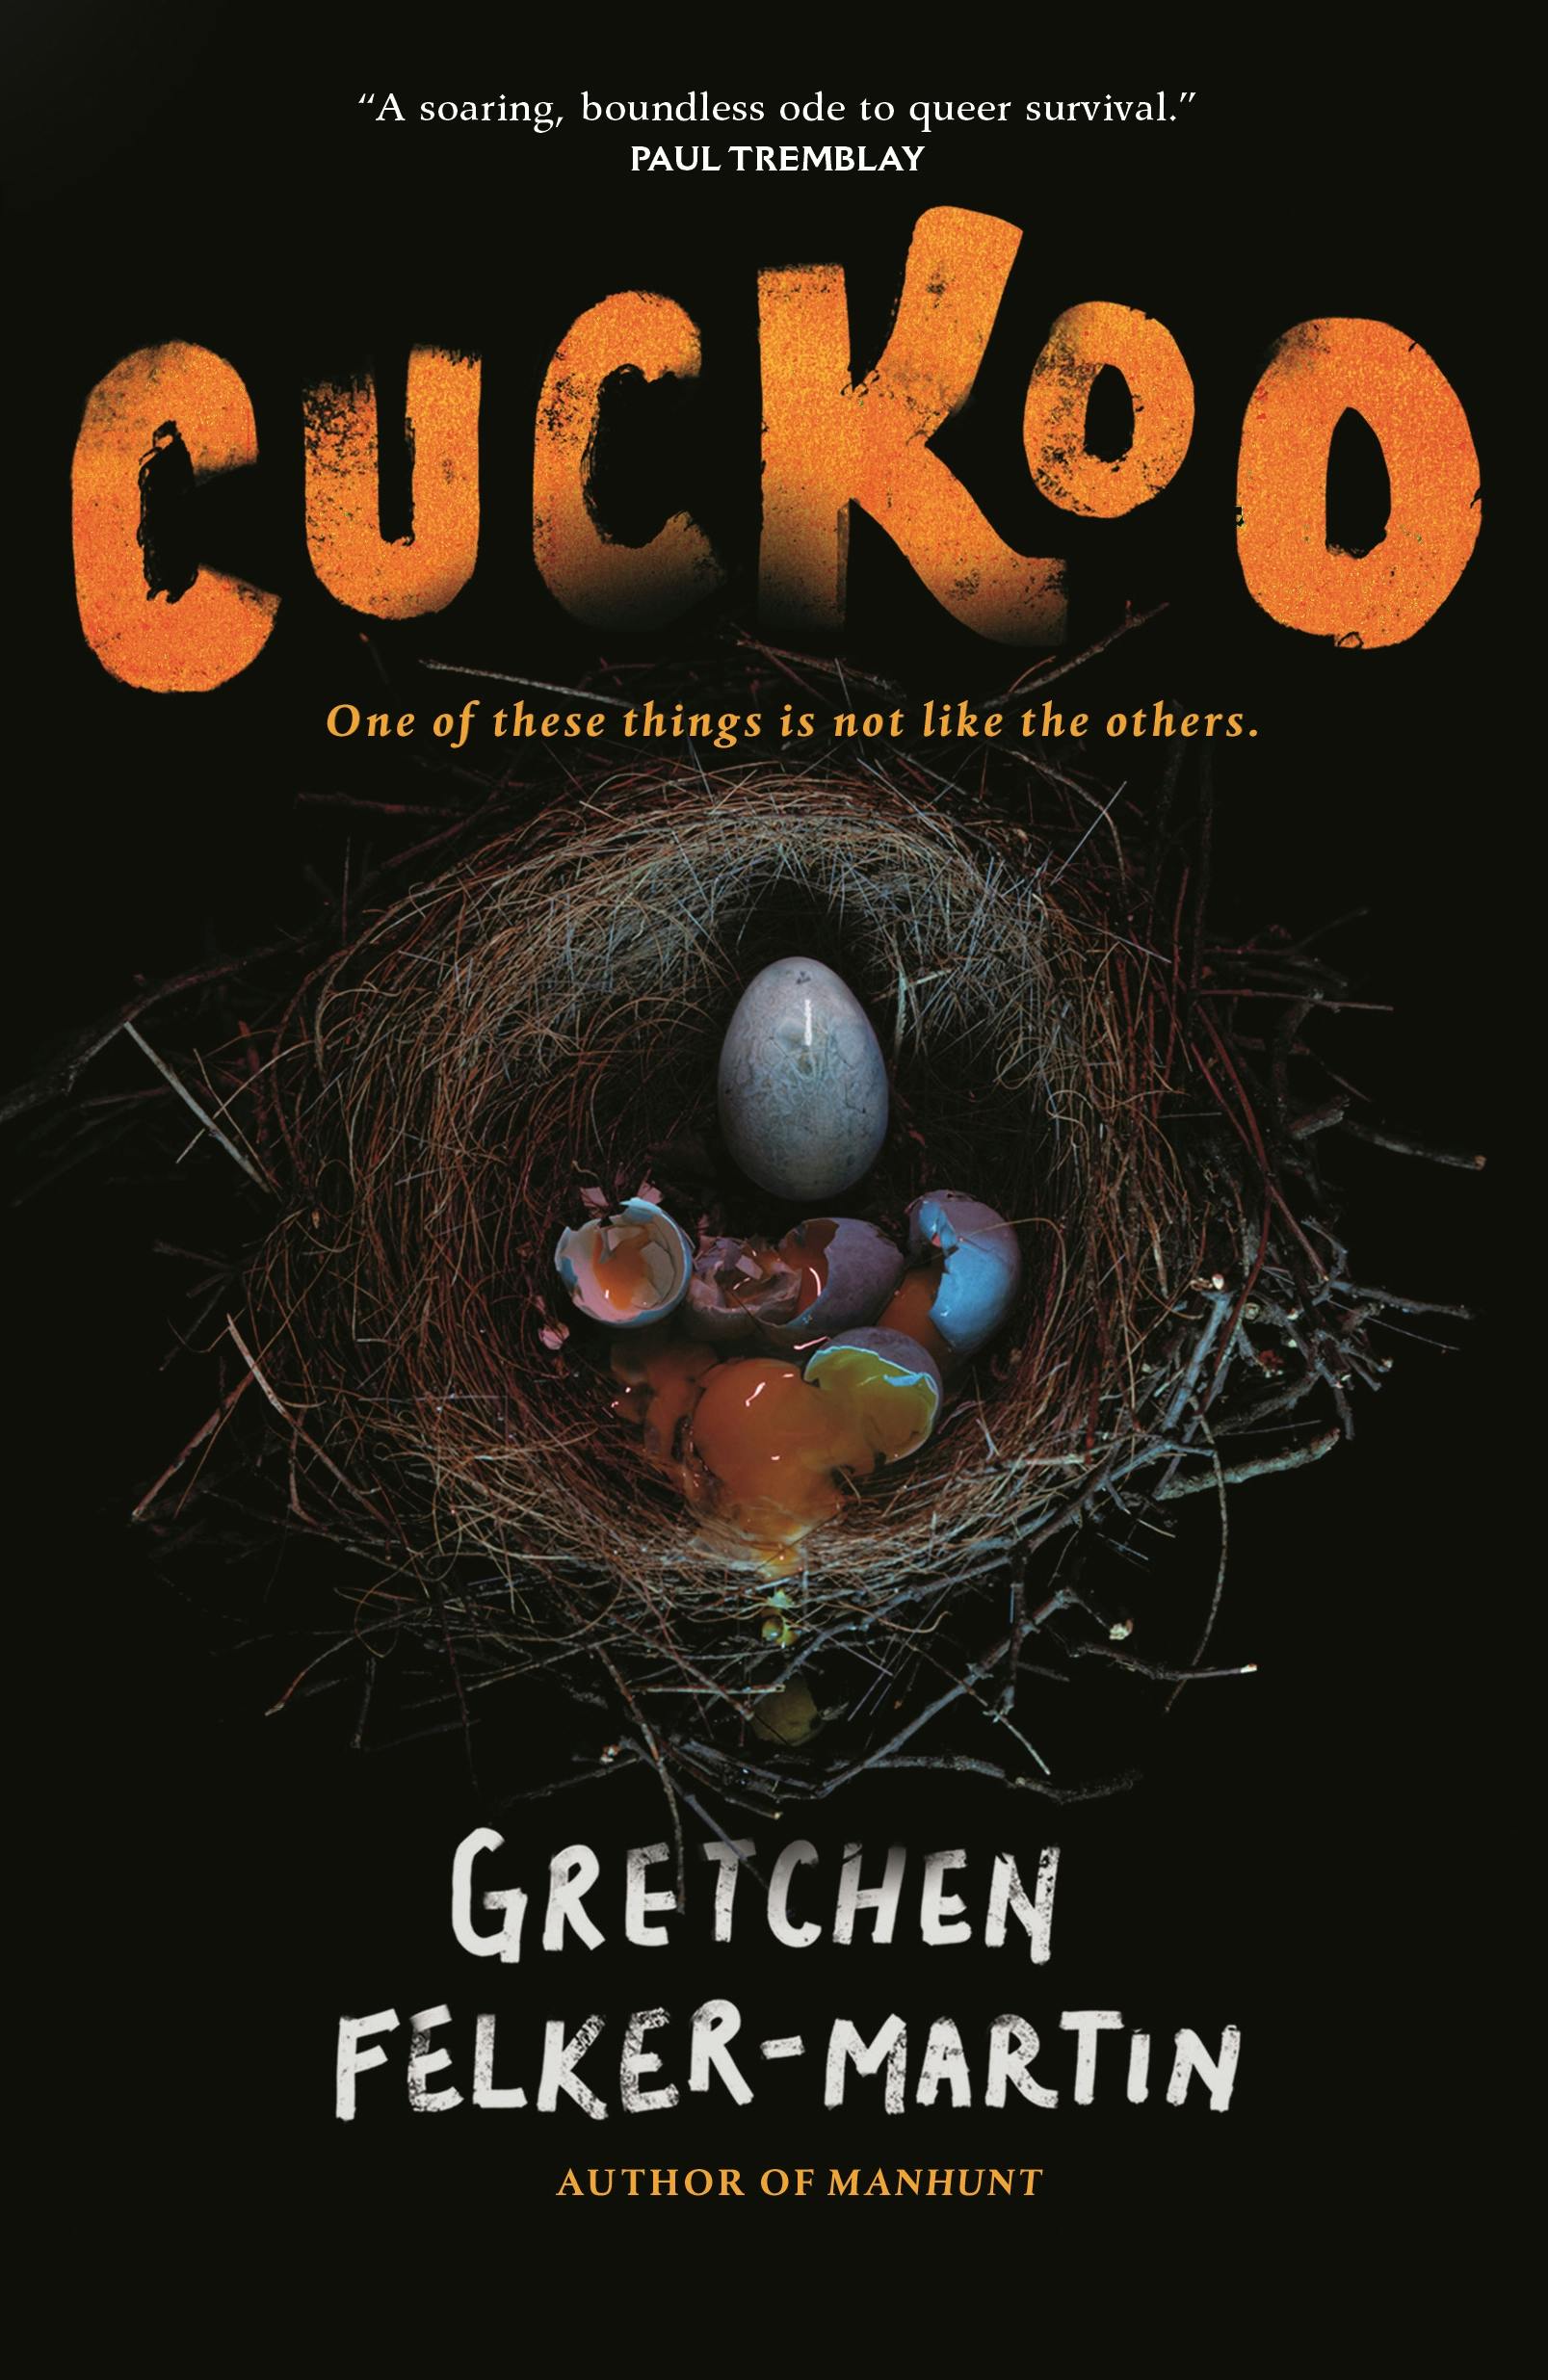 Cover for the book titled as: Cuckoo